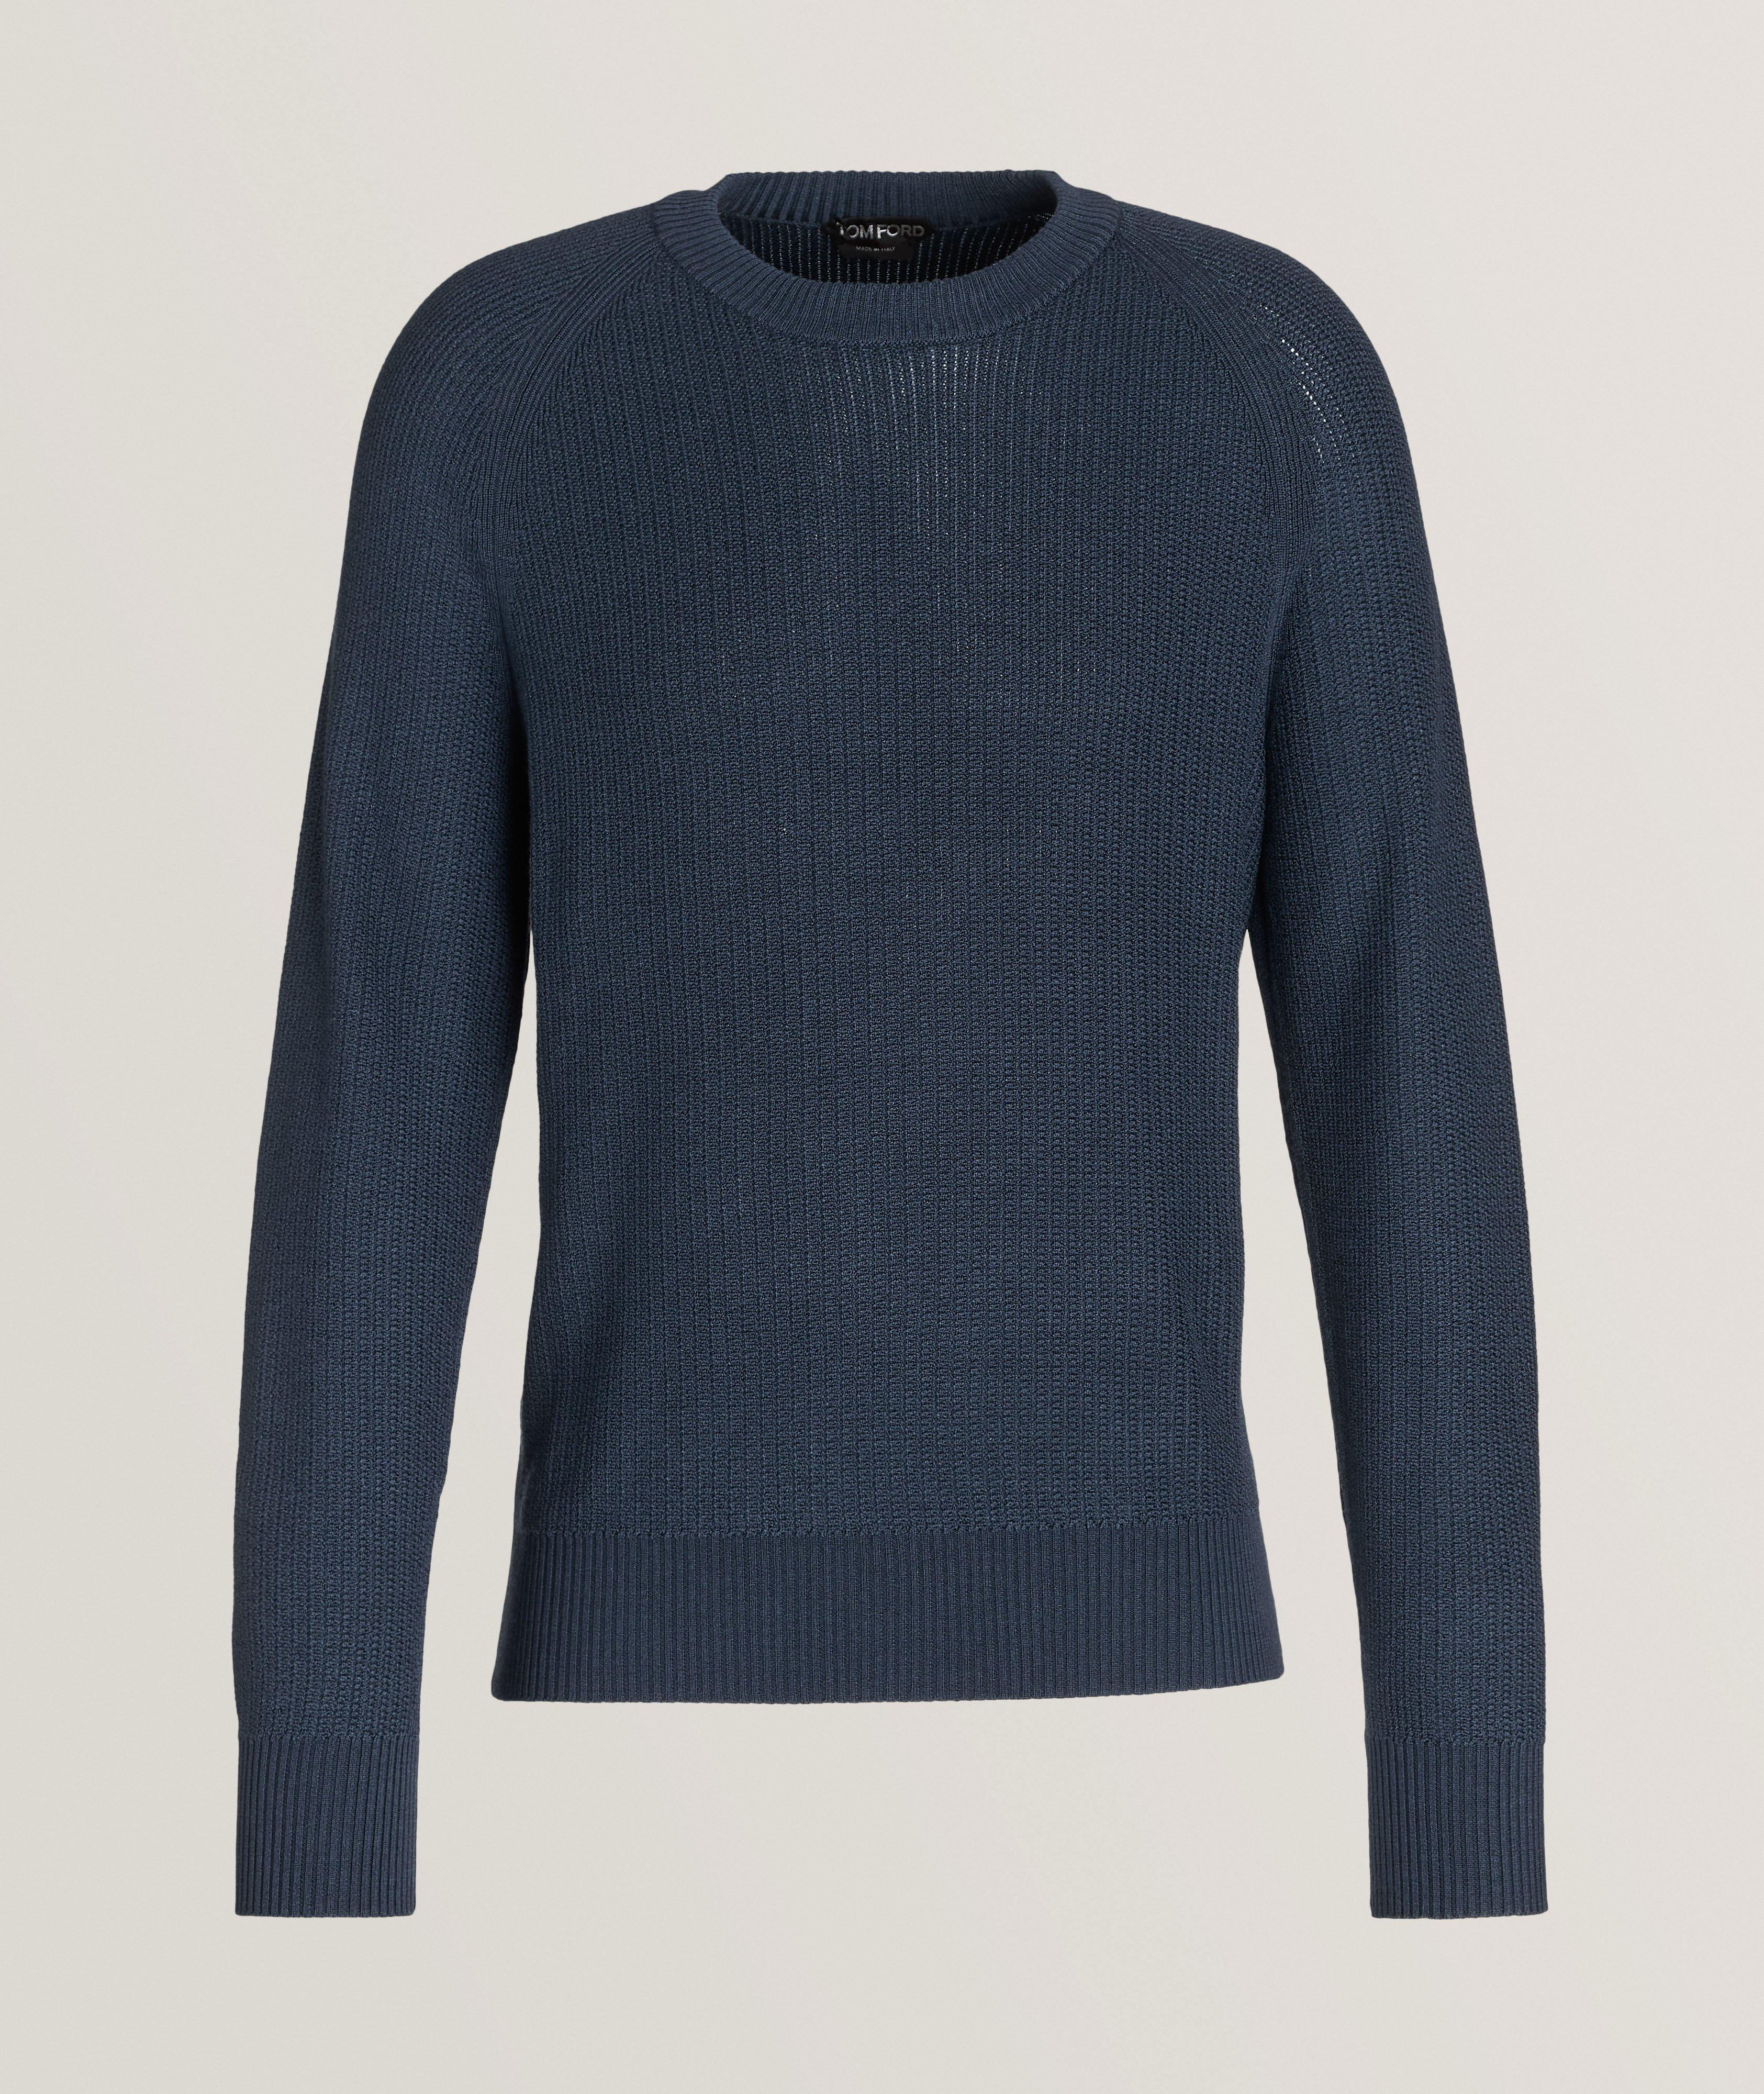 TOM FORD Textured Stitched Wool-Silk Sweater